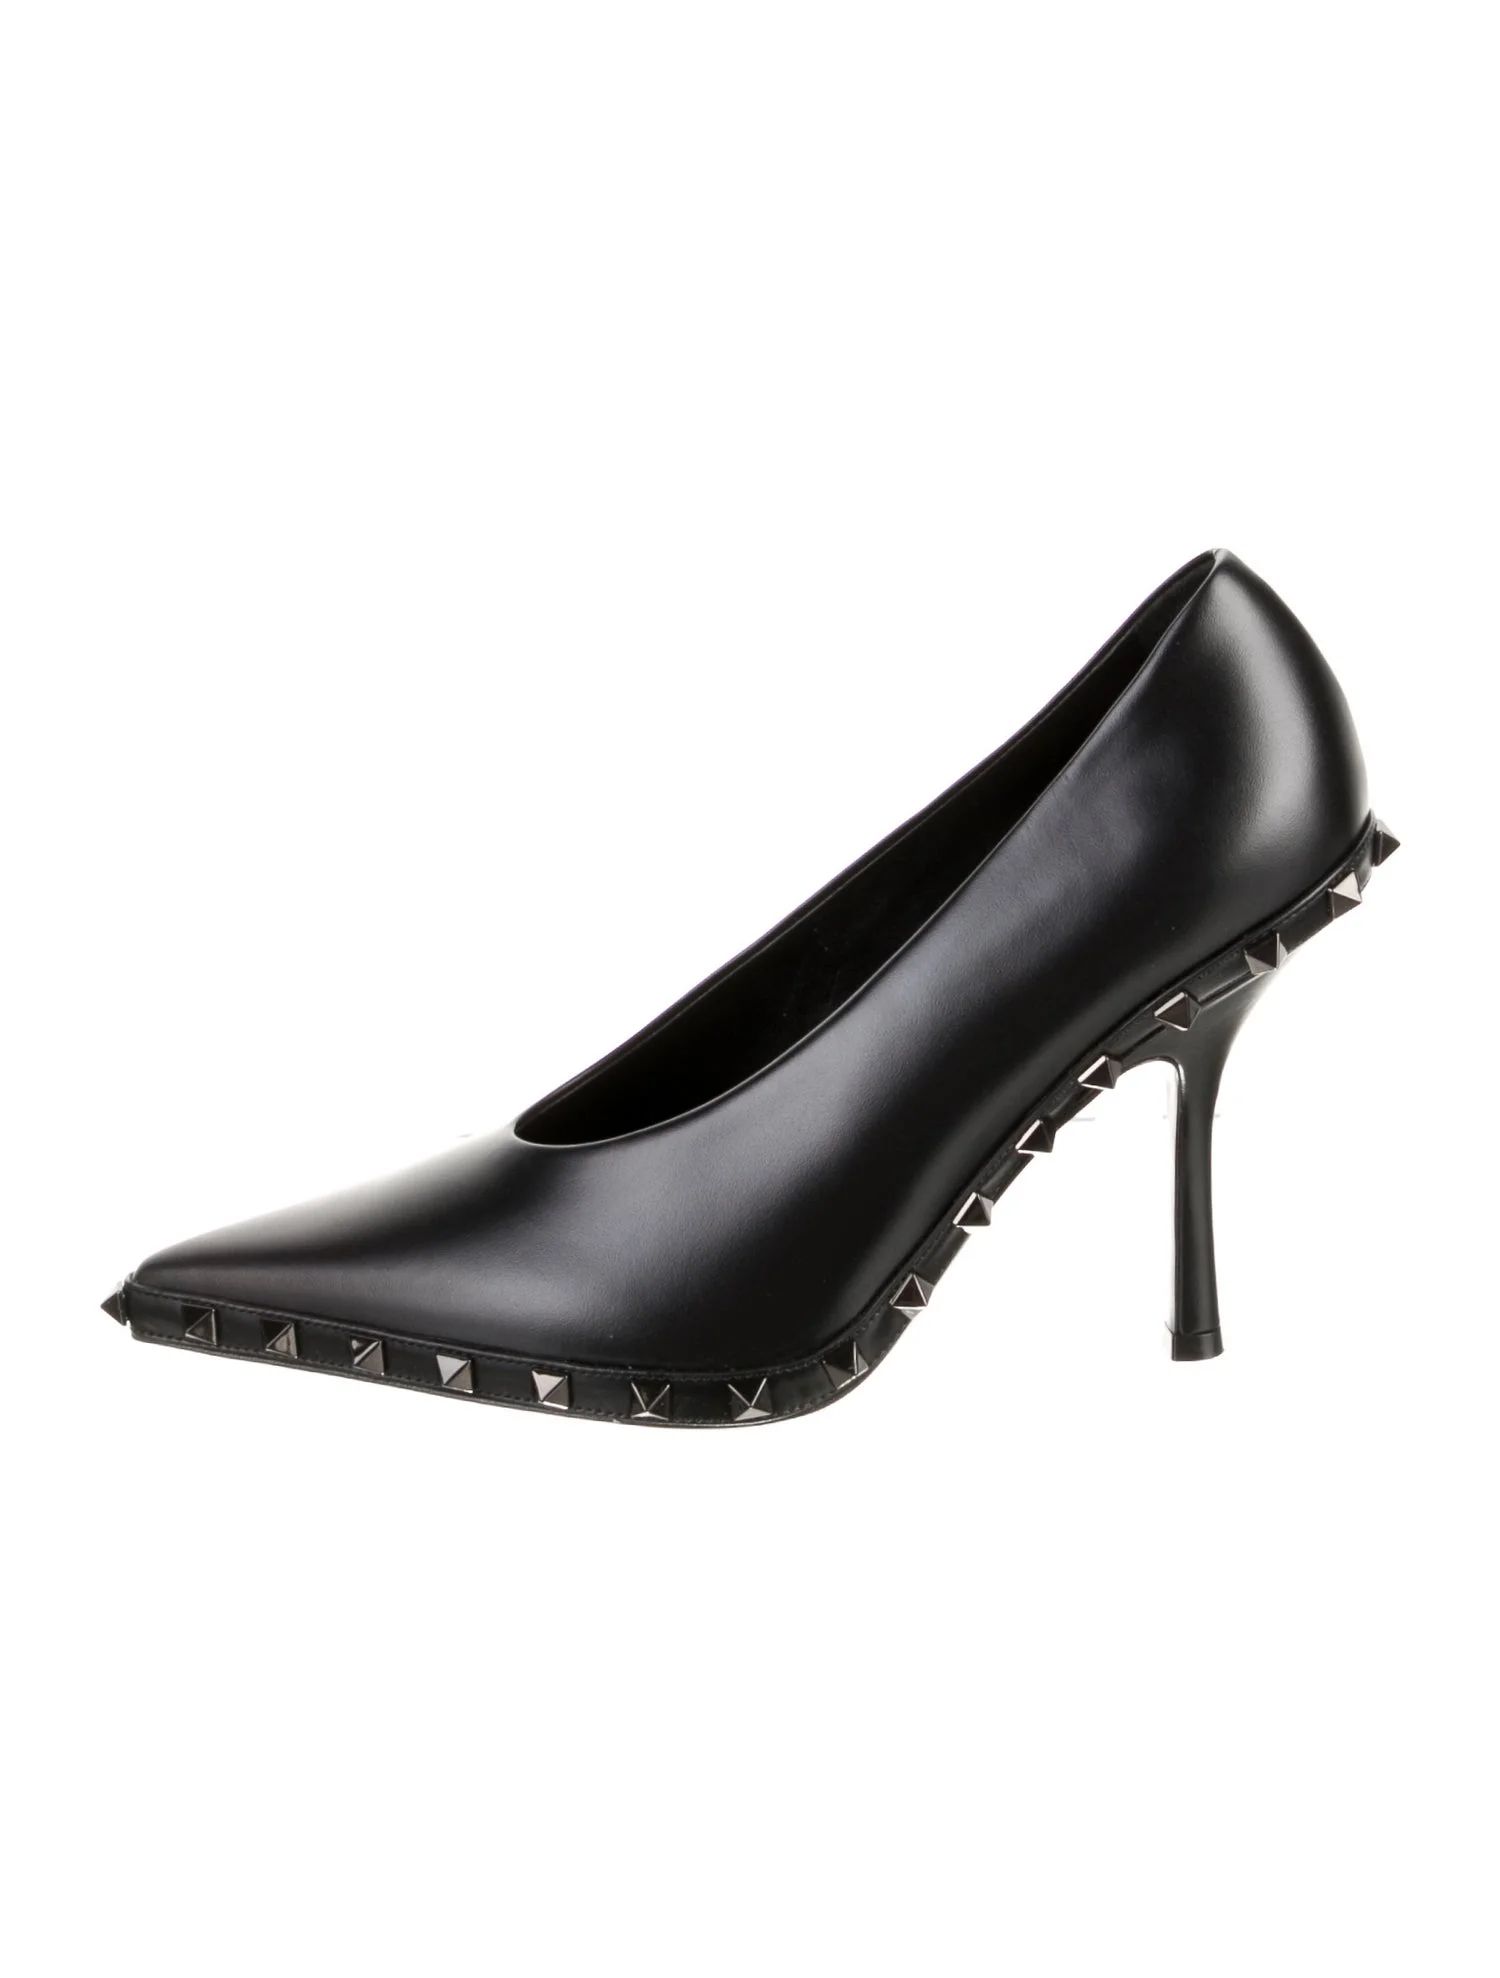 Rockstud Accents Leather Pumps | The RealReal